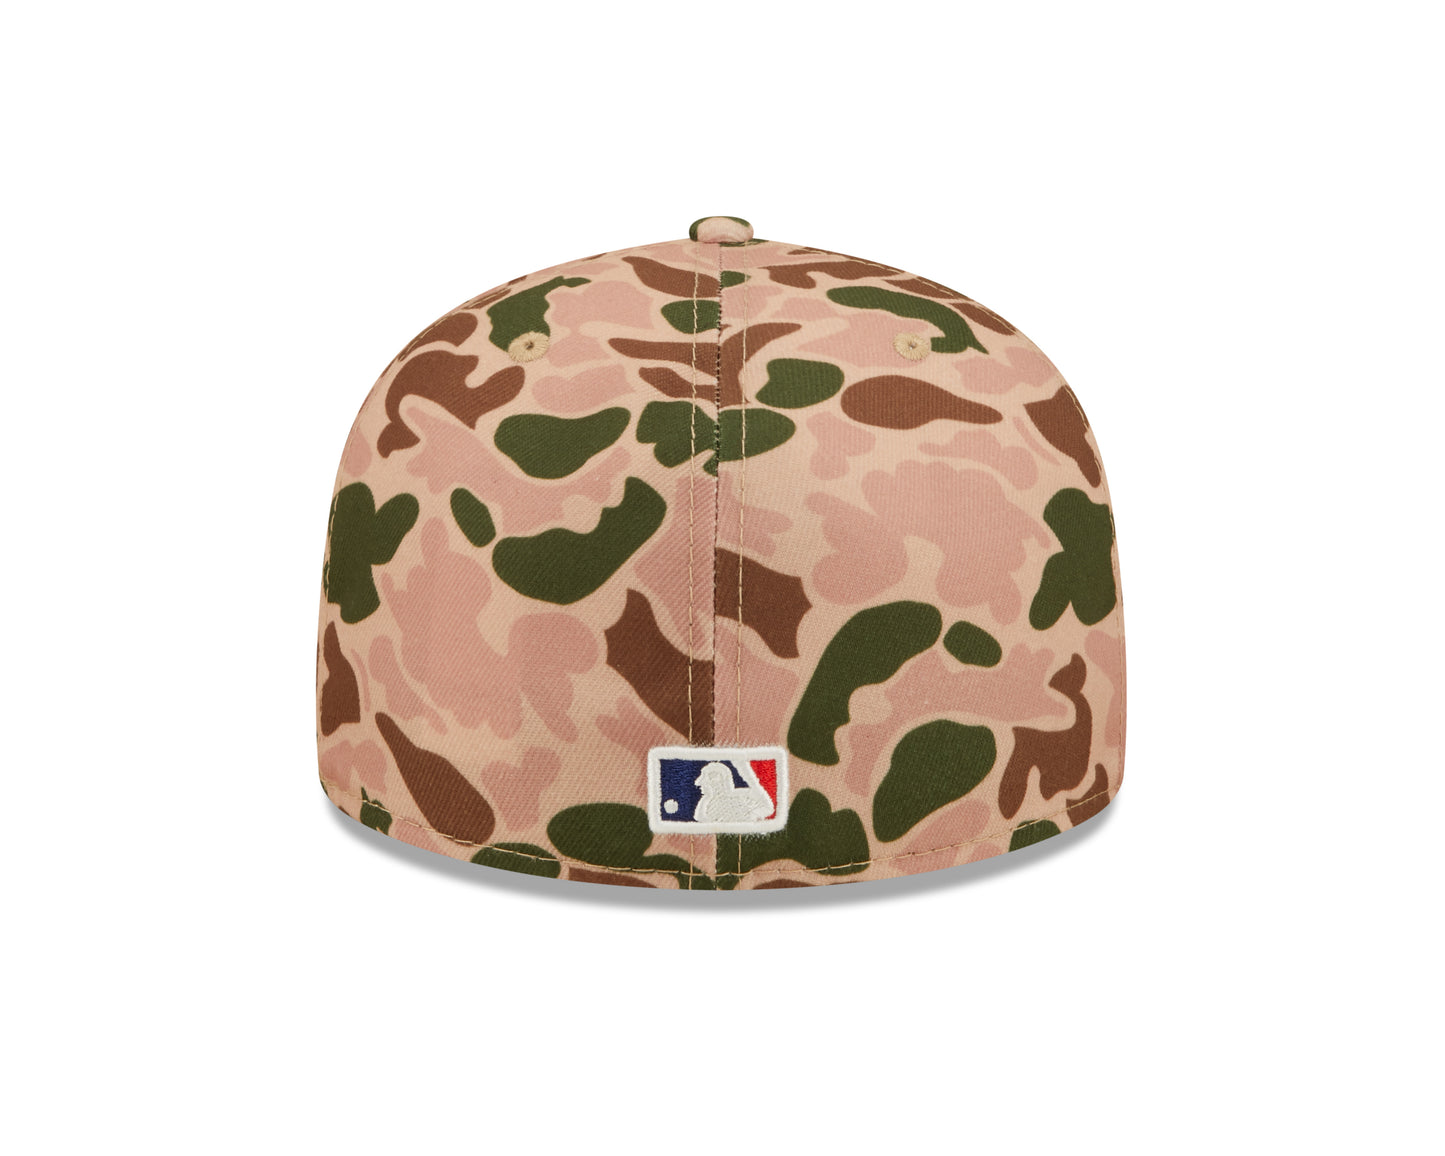 Atlanta Braves Duck Camo World Series 1995 Side Patch 59fifty Fitted Hat